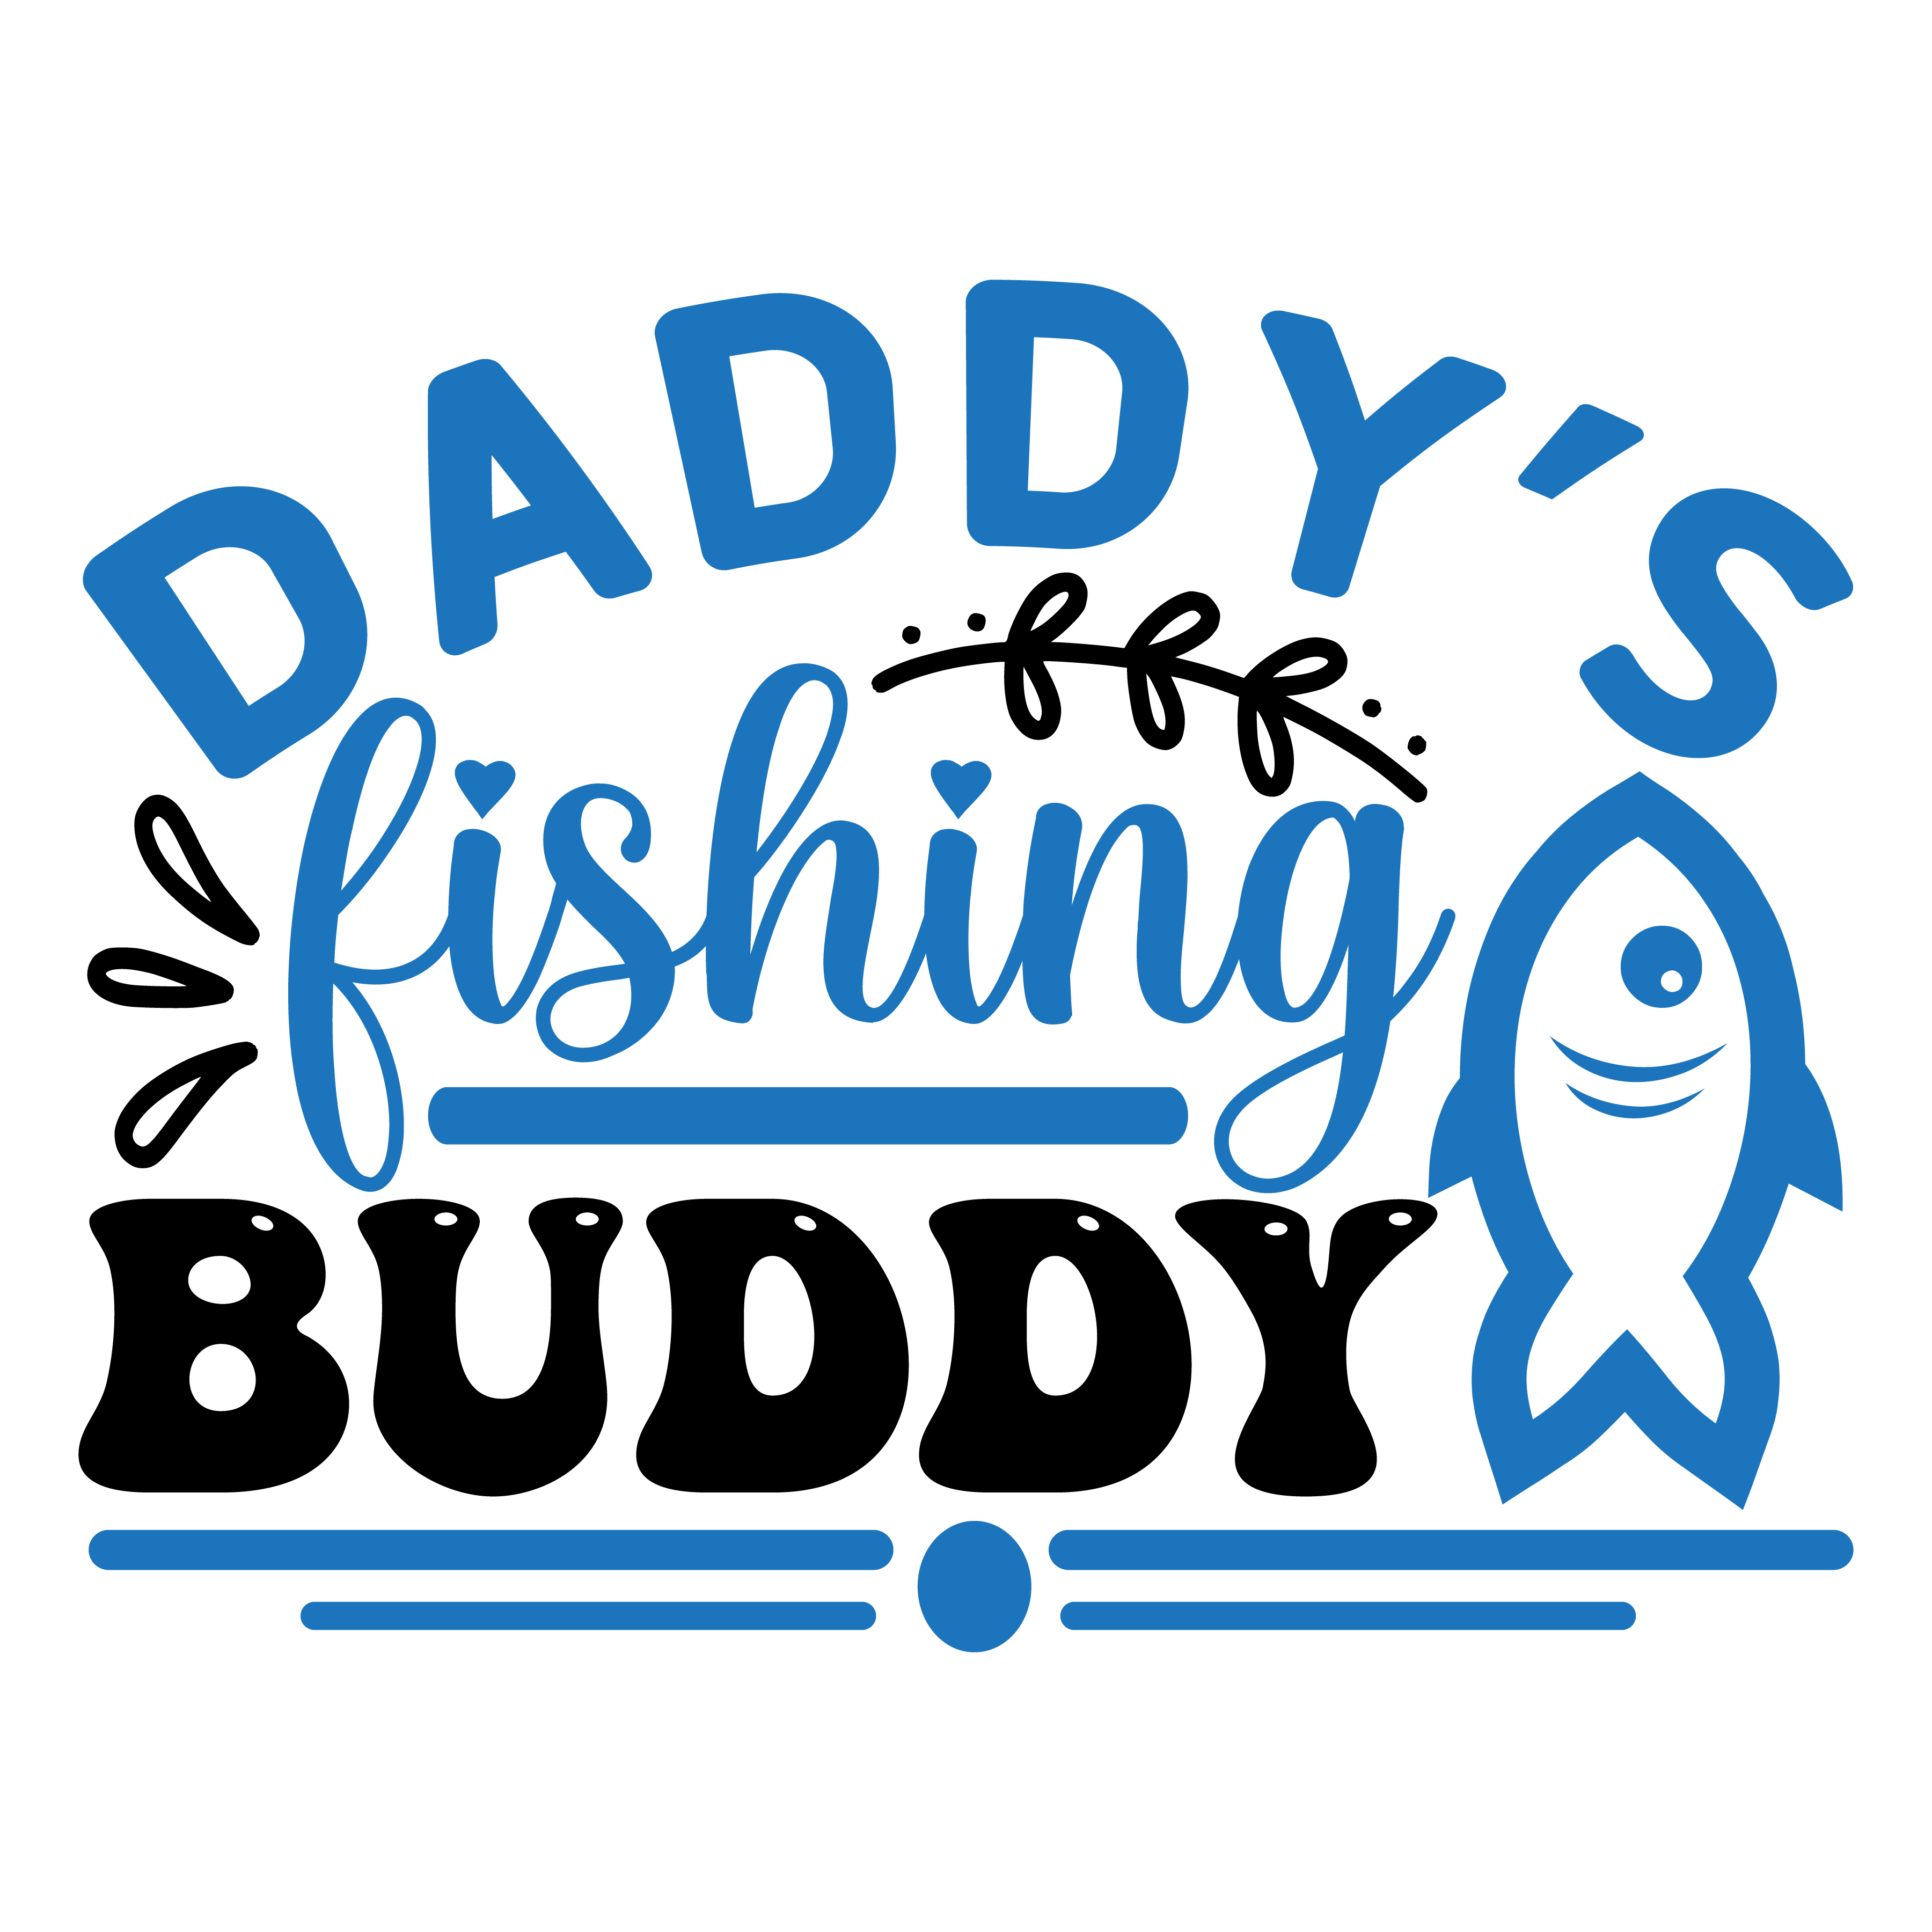 daddys fishing buddy , Fishing quotes, fishing sayings, Cricut designs, free, clip art, svg file, template, pattern, stencil, silhouette, cut file, design space, short, funny, shirt, cup, DIY crafts and projects, embroidery